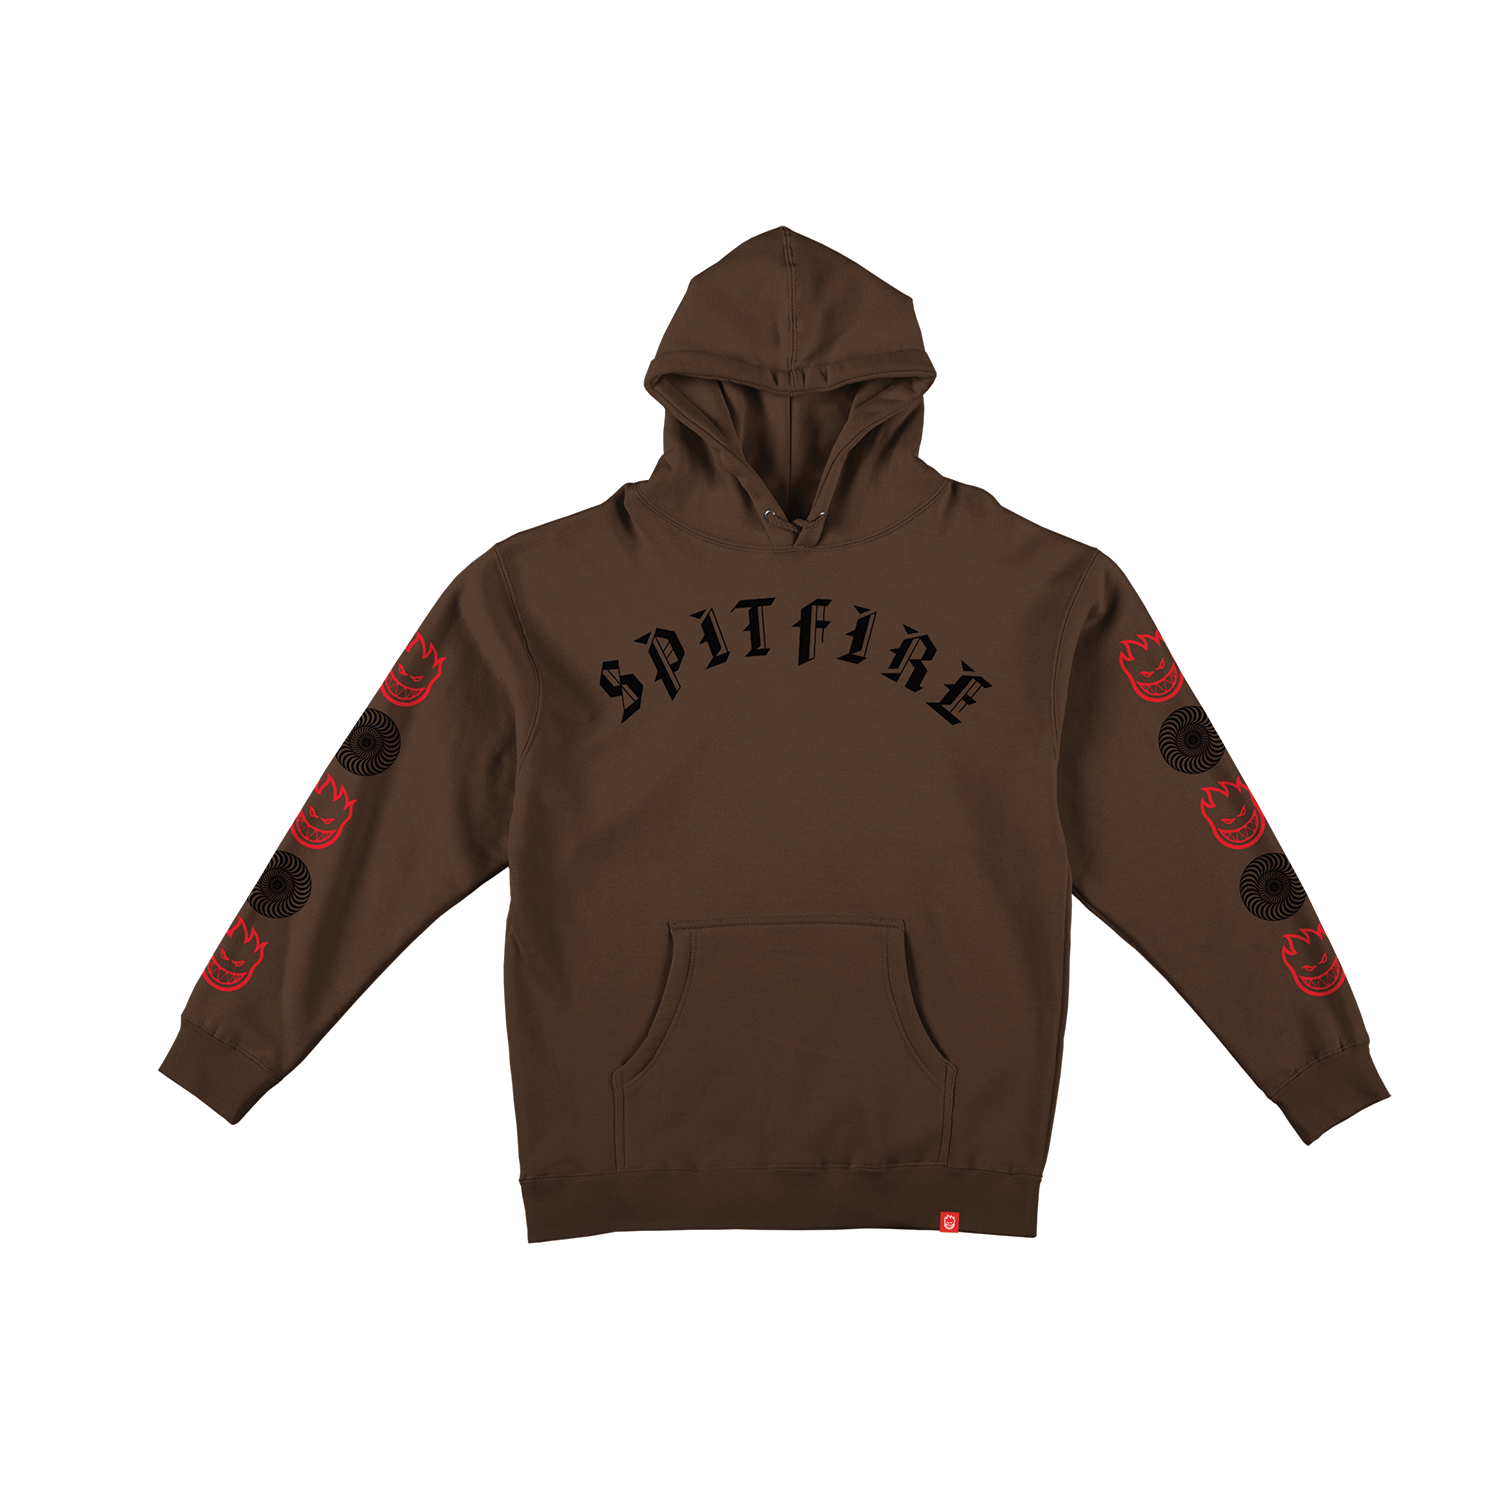 SPITFIRE OLD E  HOODIE - BROWN/BLACK/RED